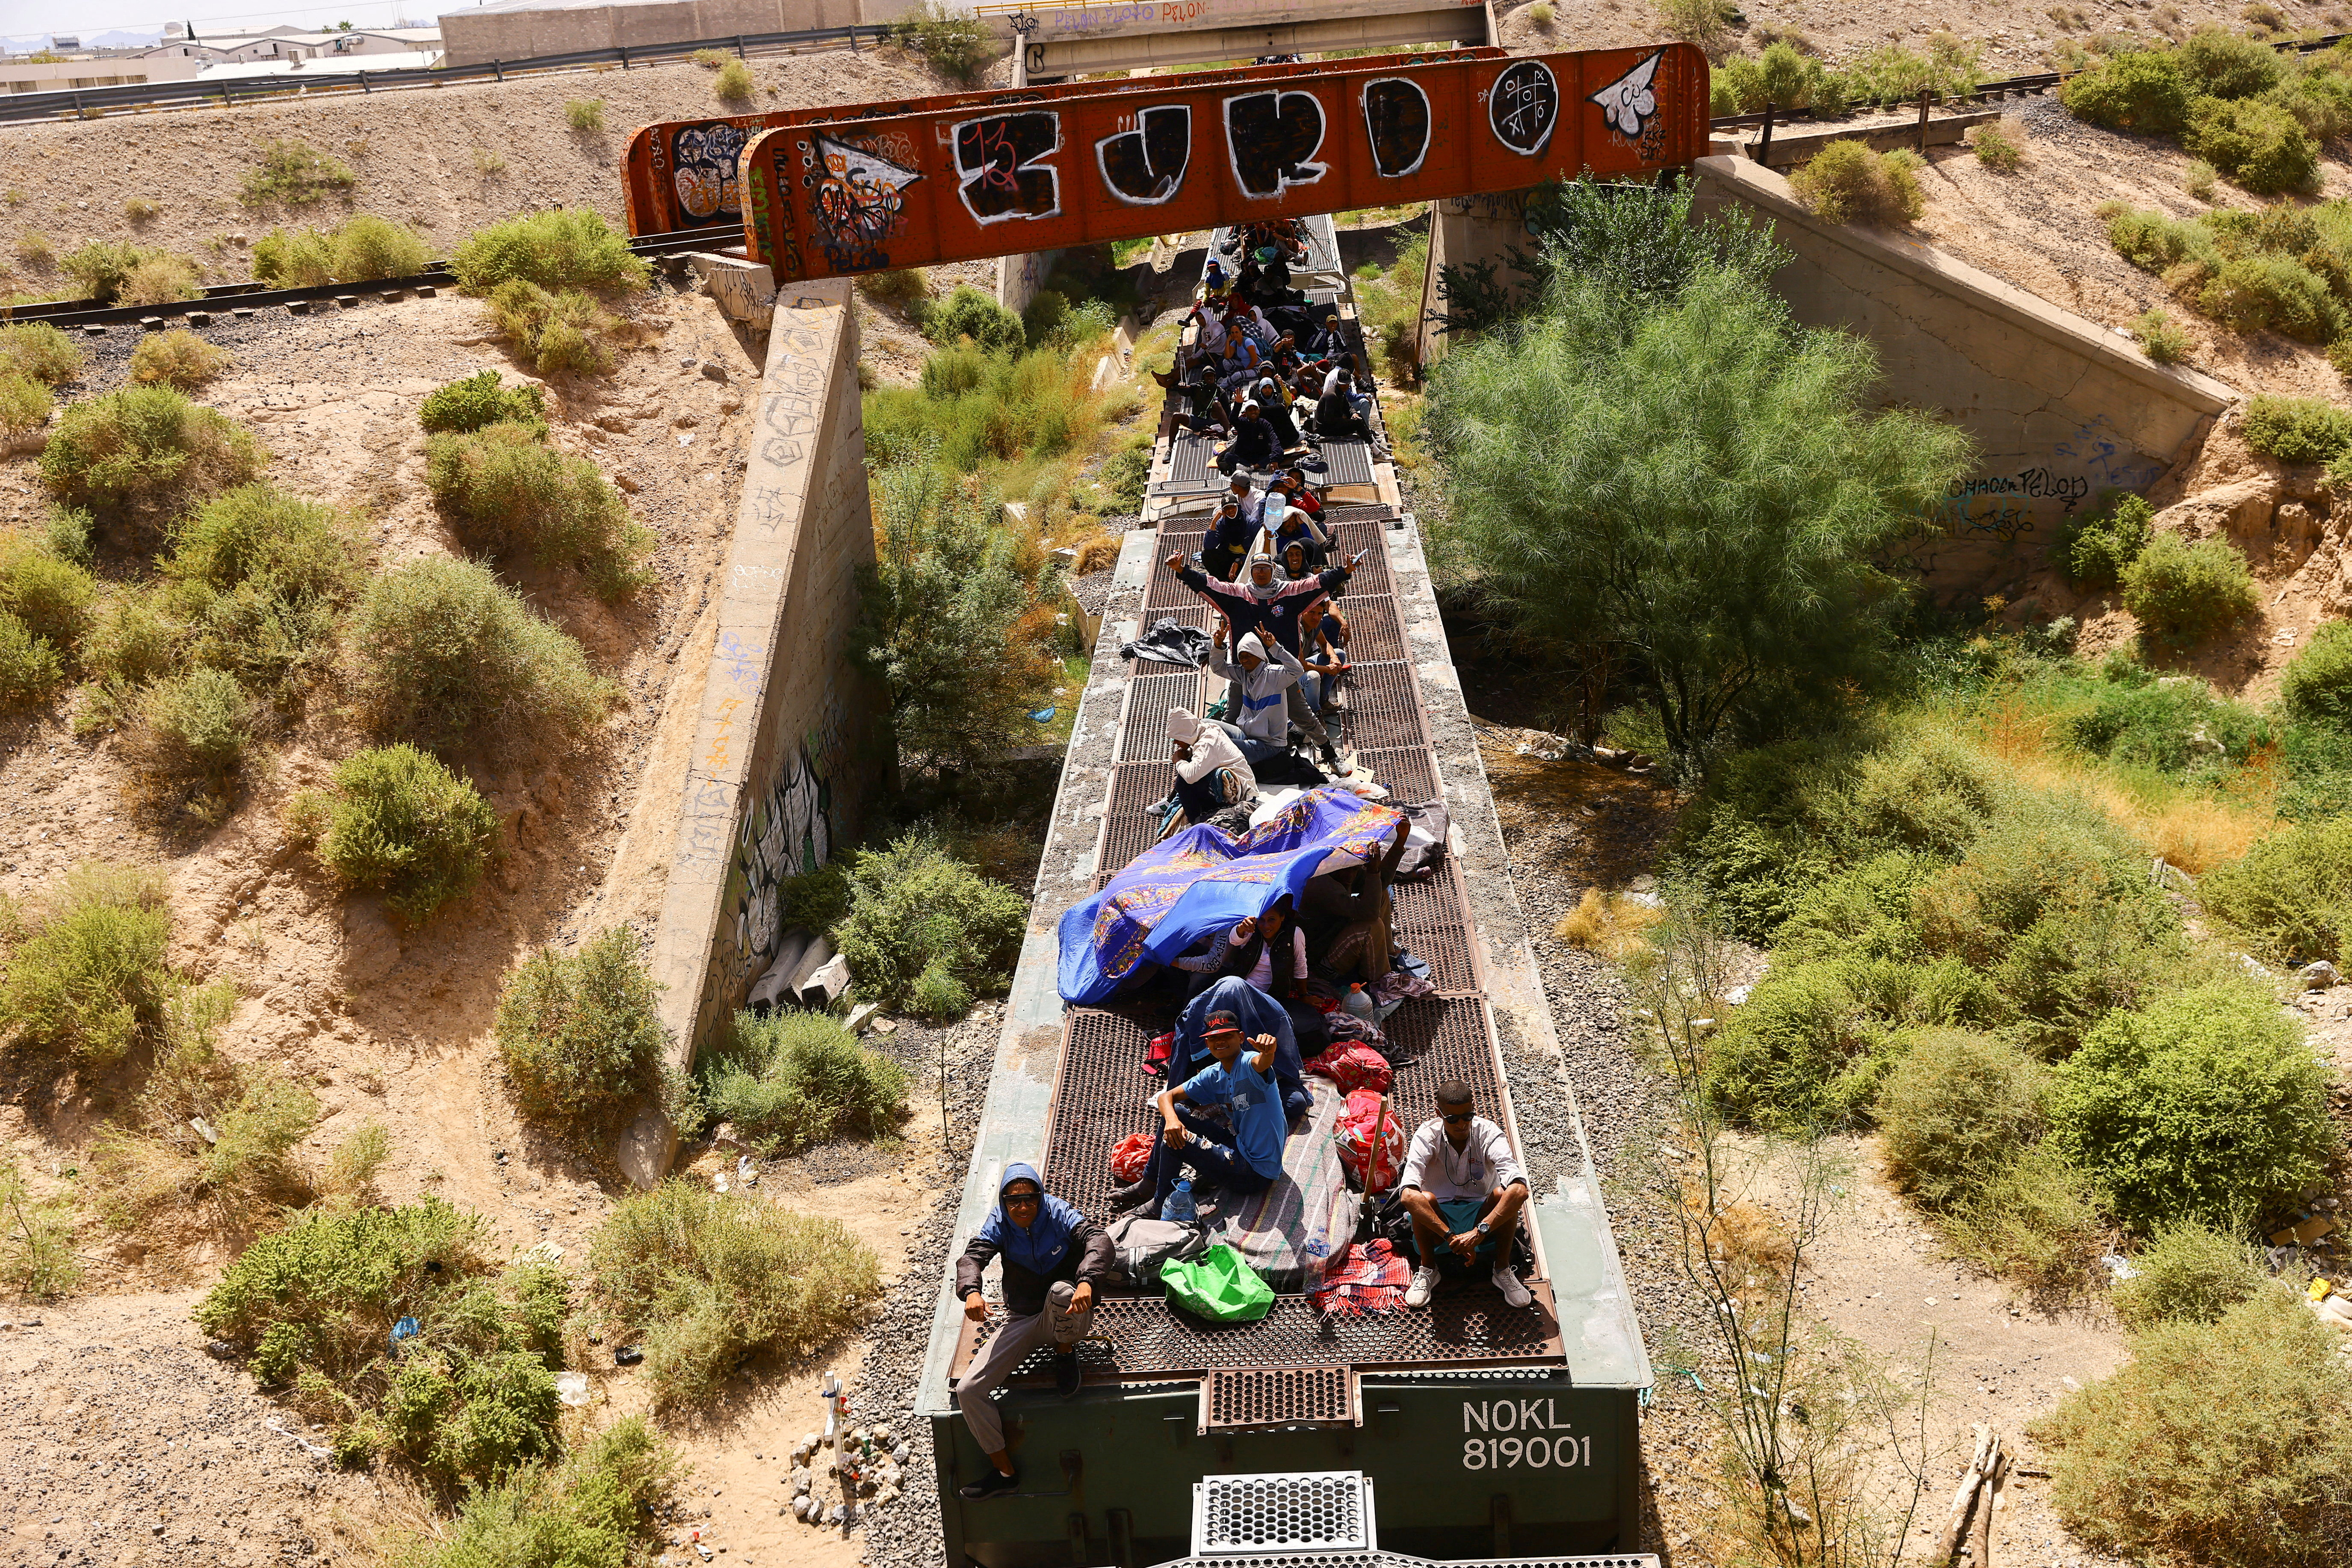 Migrants travel on a train with the intention of reaching the United States, in Ciudad Juarez